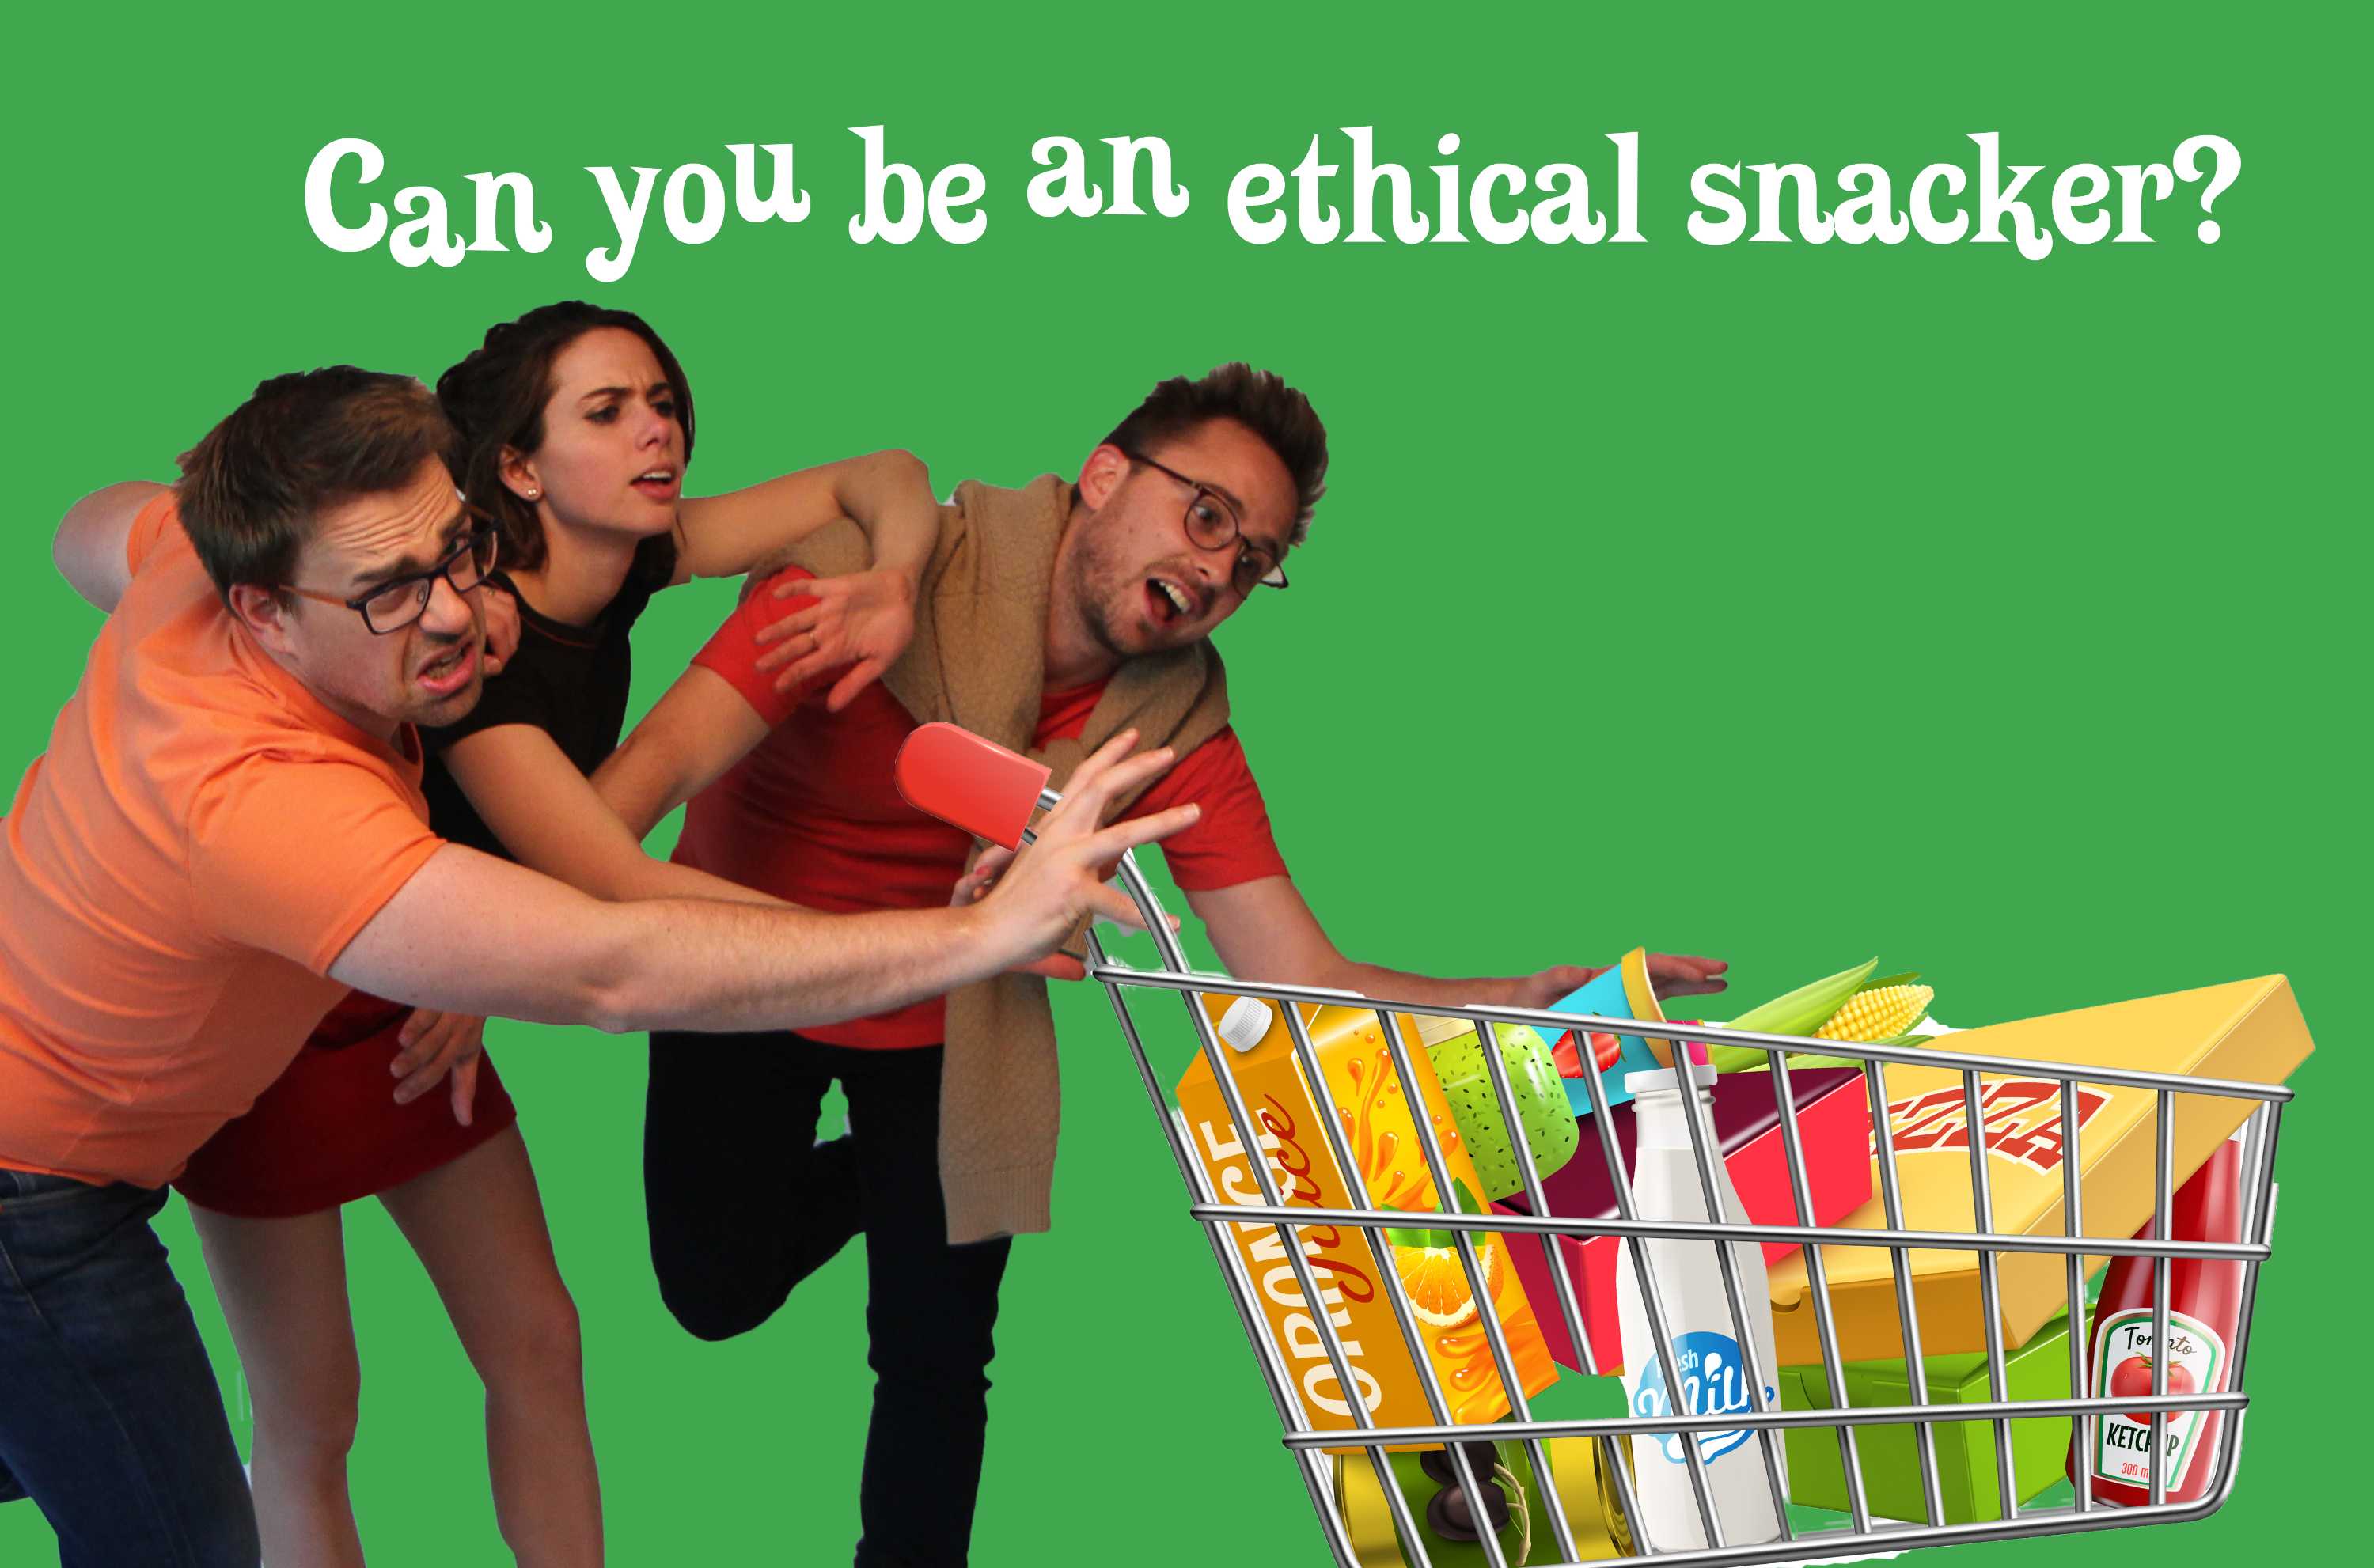 Food fight! Can you be an ethical snacker?